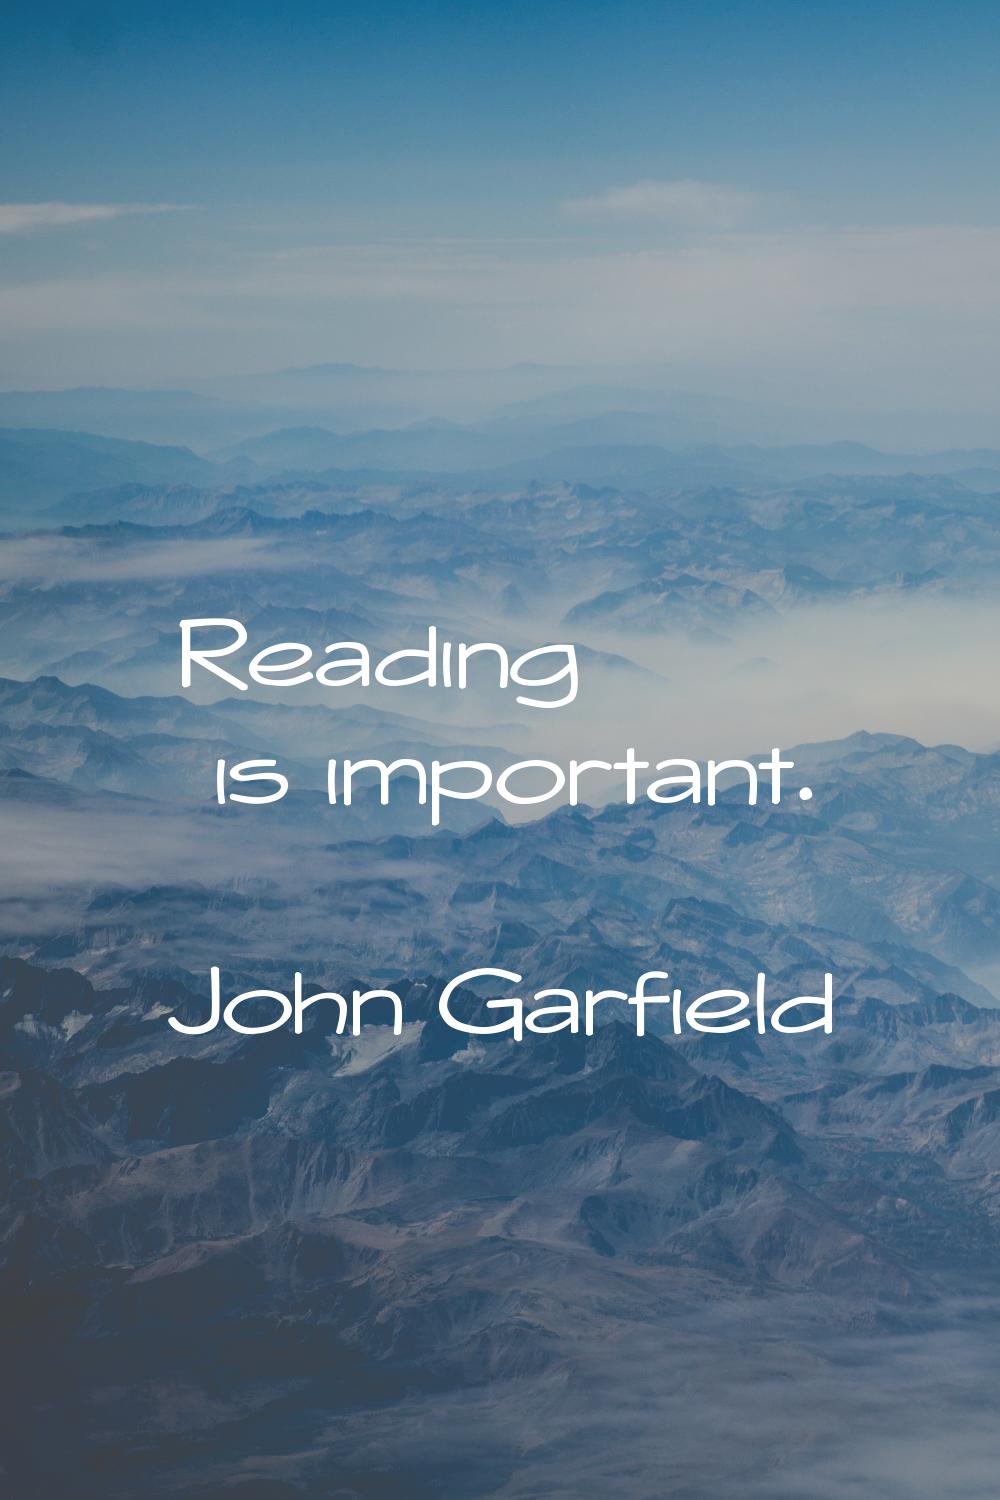 Reading is important.